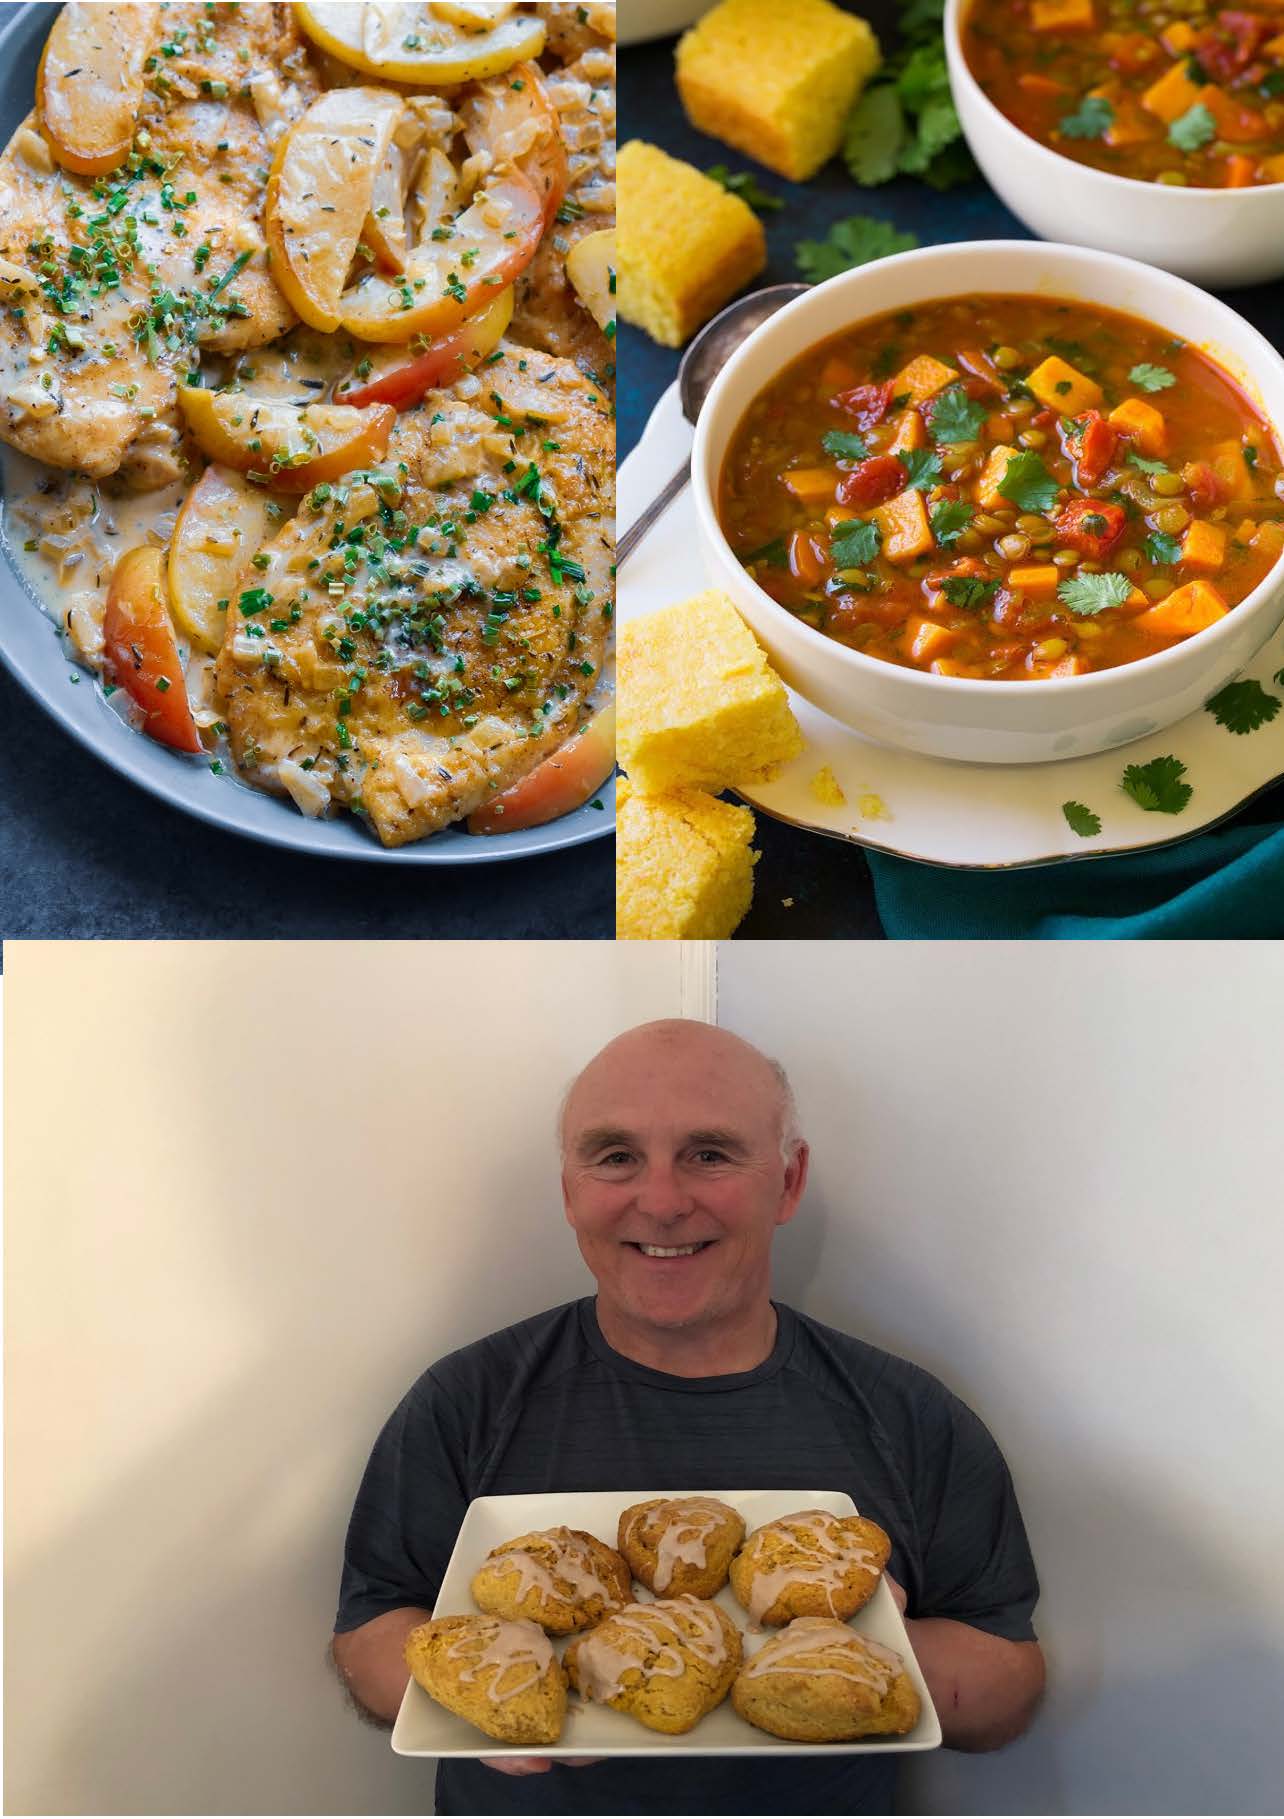 Collage Image of 3 pictures, one with chicken and Rosemary, one with a soup and one with Chef Rob holding a plate of scones. 